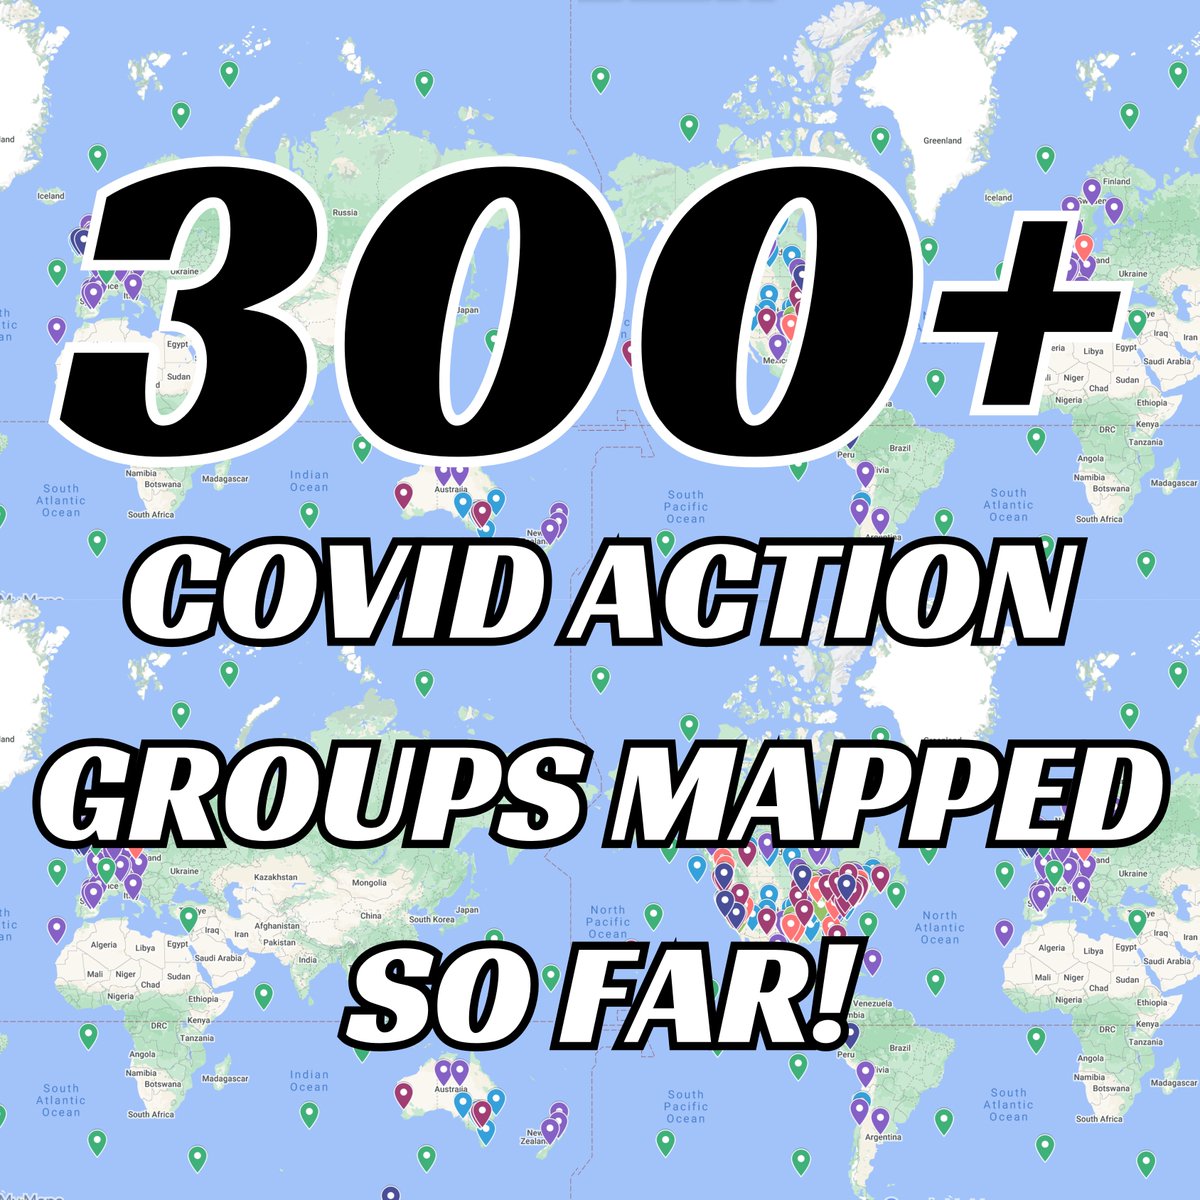 We reached 300 COVID action groups on the map! Check them out at covidactionmap.org, and support your local groups by volunteering your time, donating to their fundraising efforts, and sharing them with your communities.